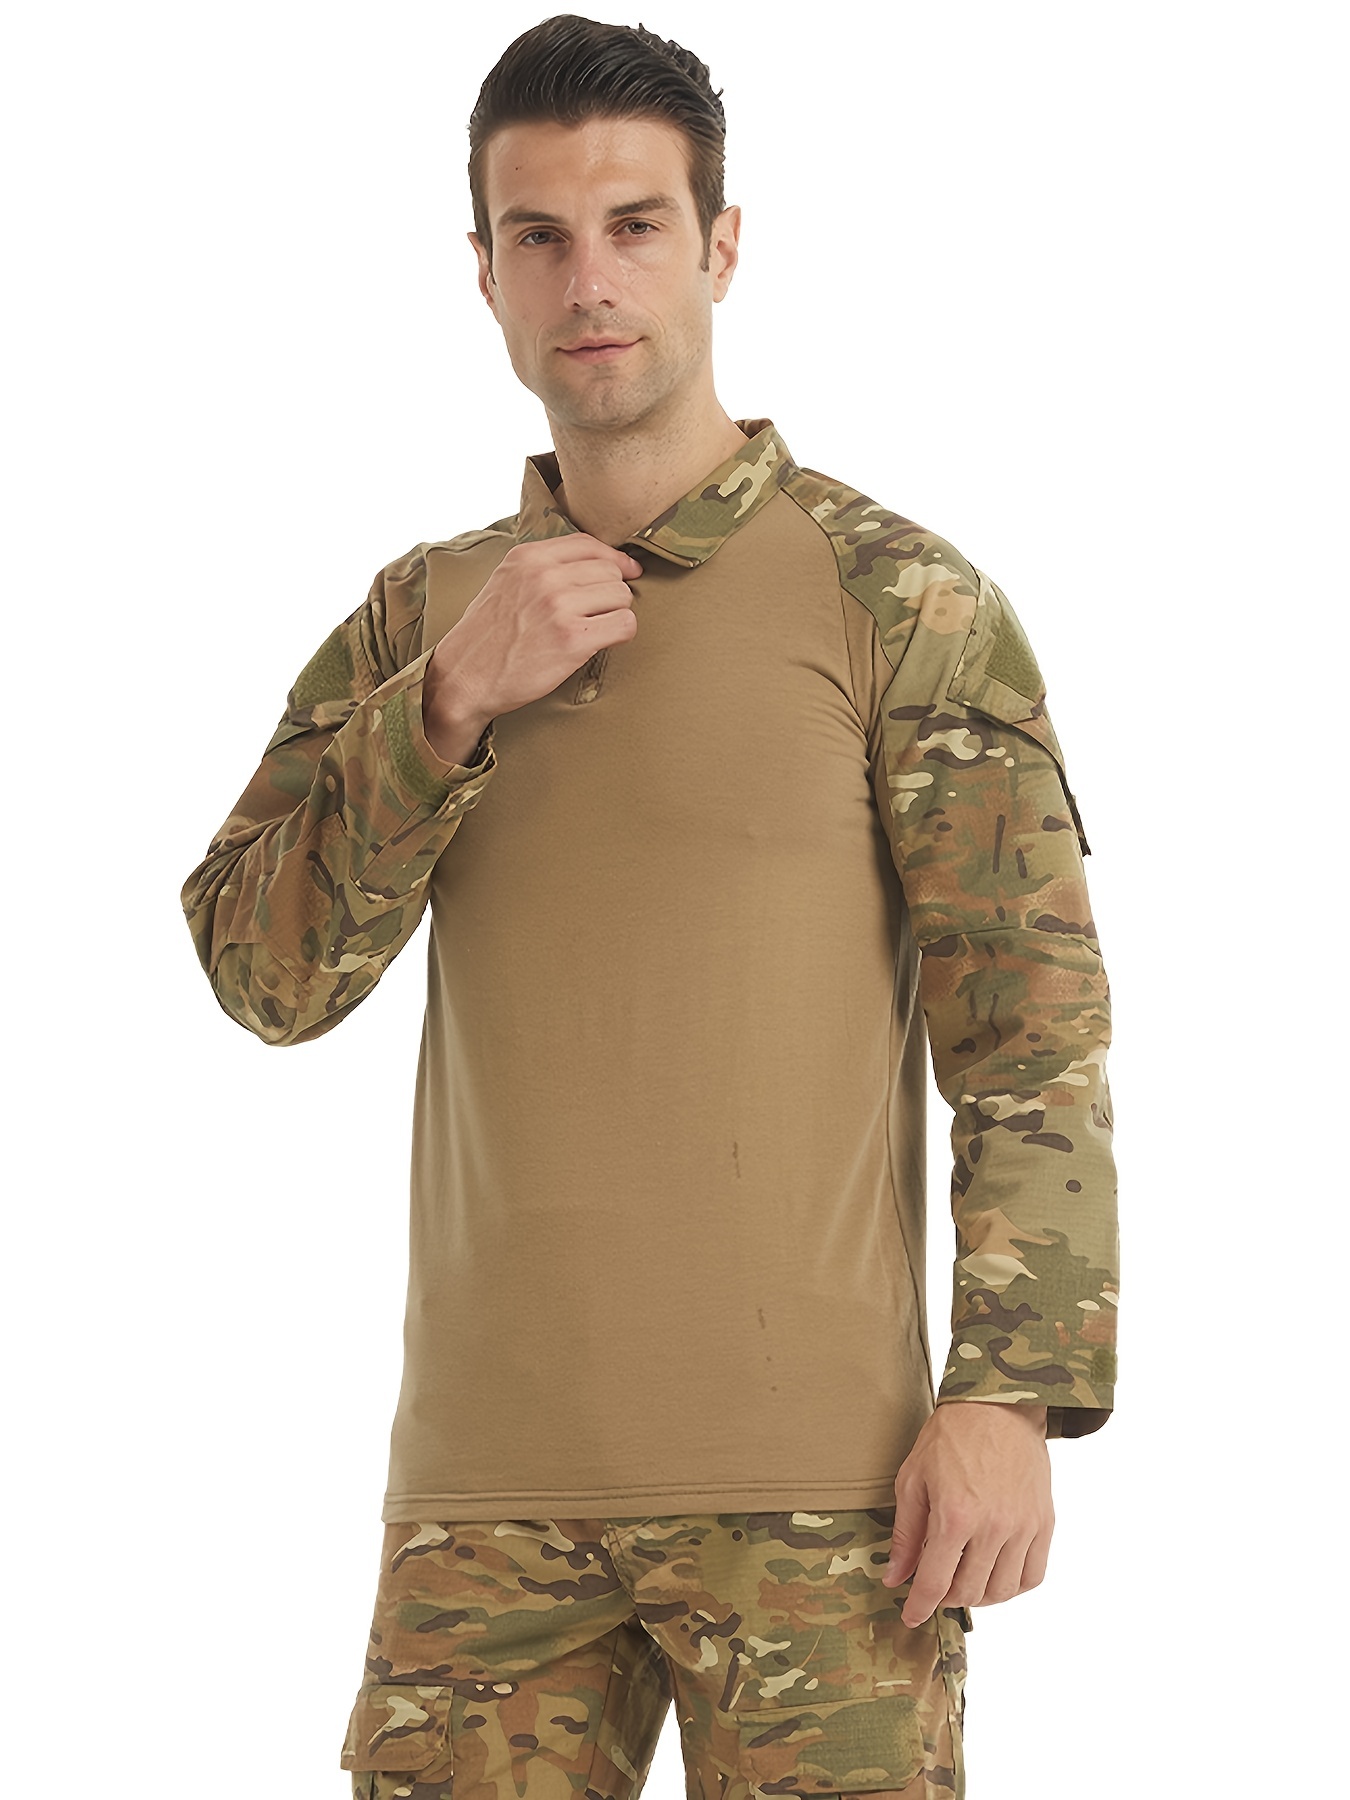 Camouflage Tactical Shirt Short Sleeve Men's Quick-drying Combat T-shirt  Military Camouflage Outdoor Hiking Hunting